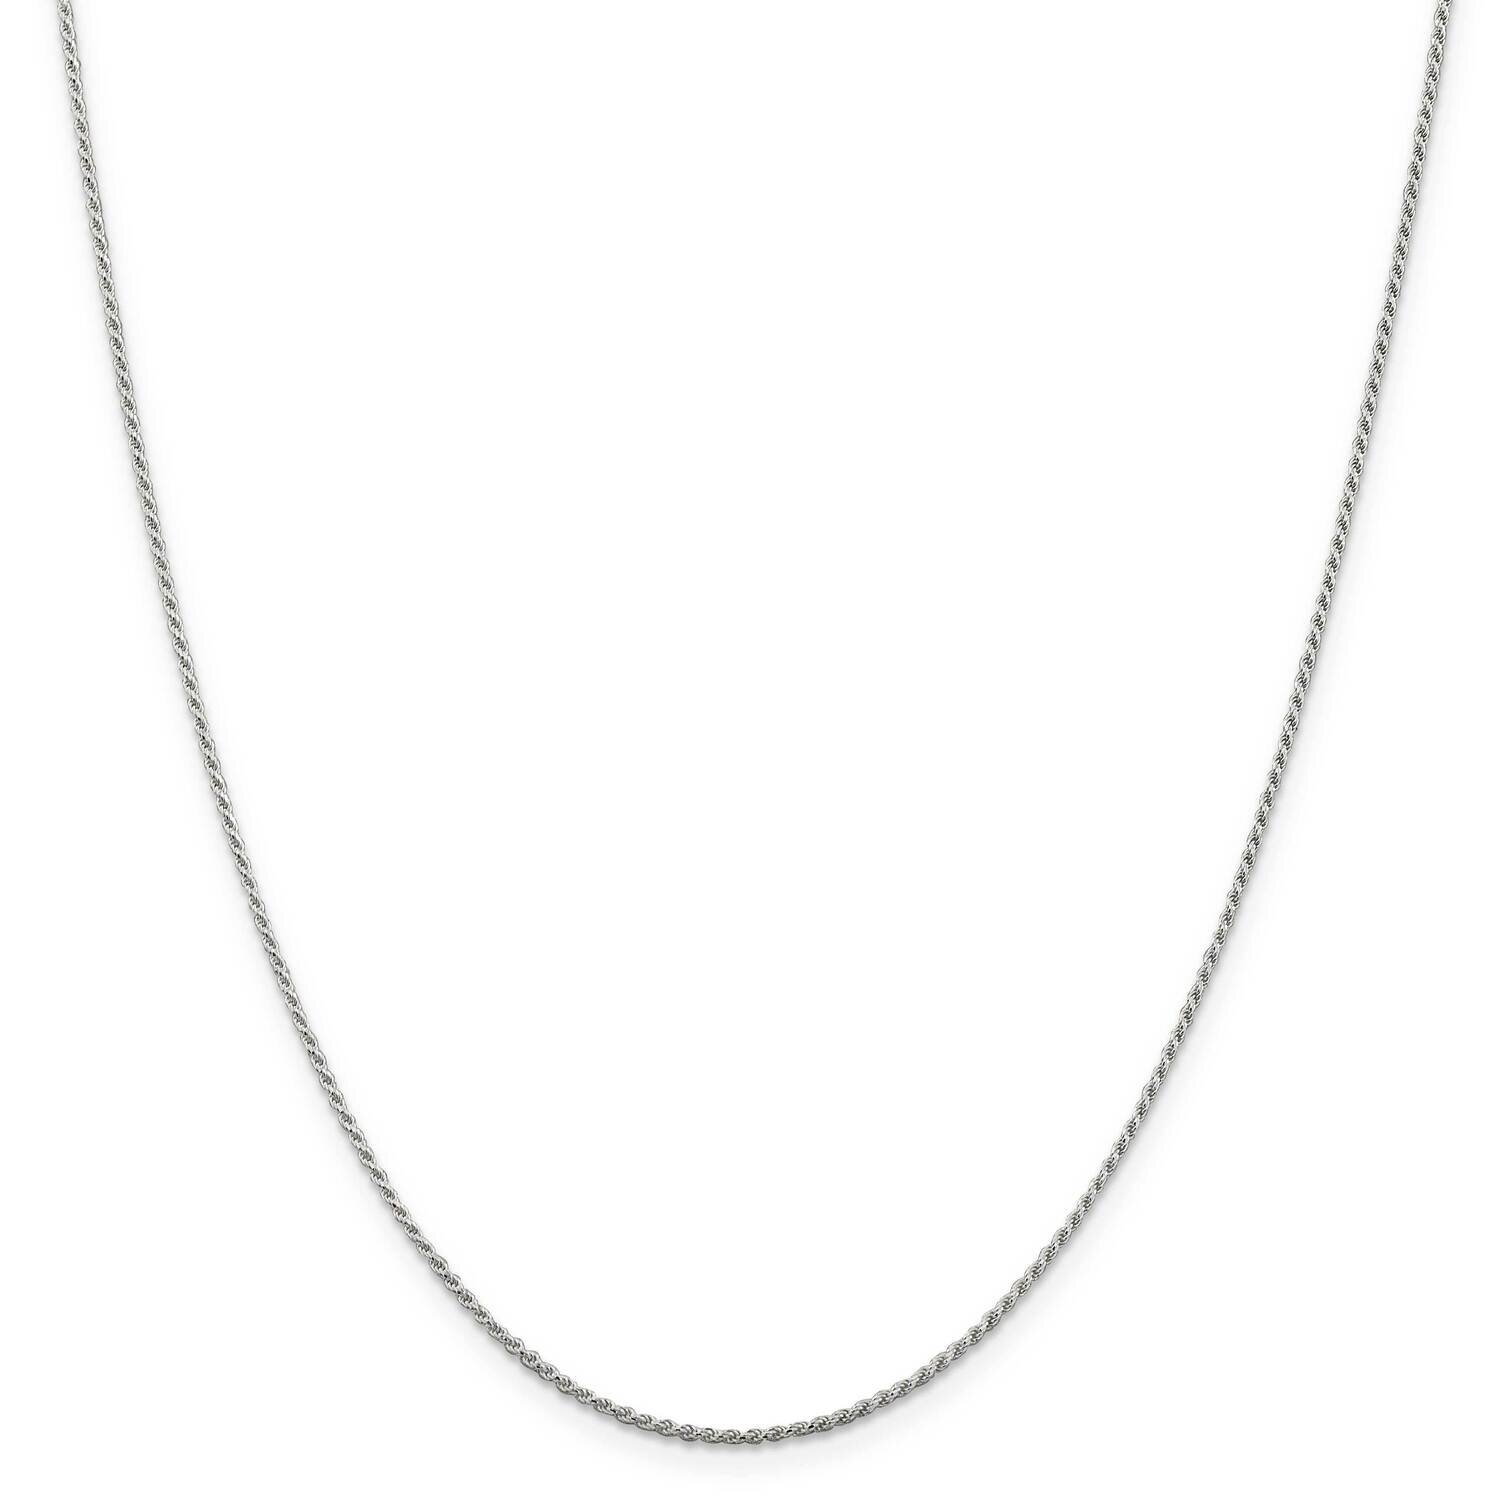 1.1mm Diamond-Cut Rope Chain with 2 Inch Extender 18 Inch Sterling Silver Rhodium-Plated QDC015RH-18